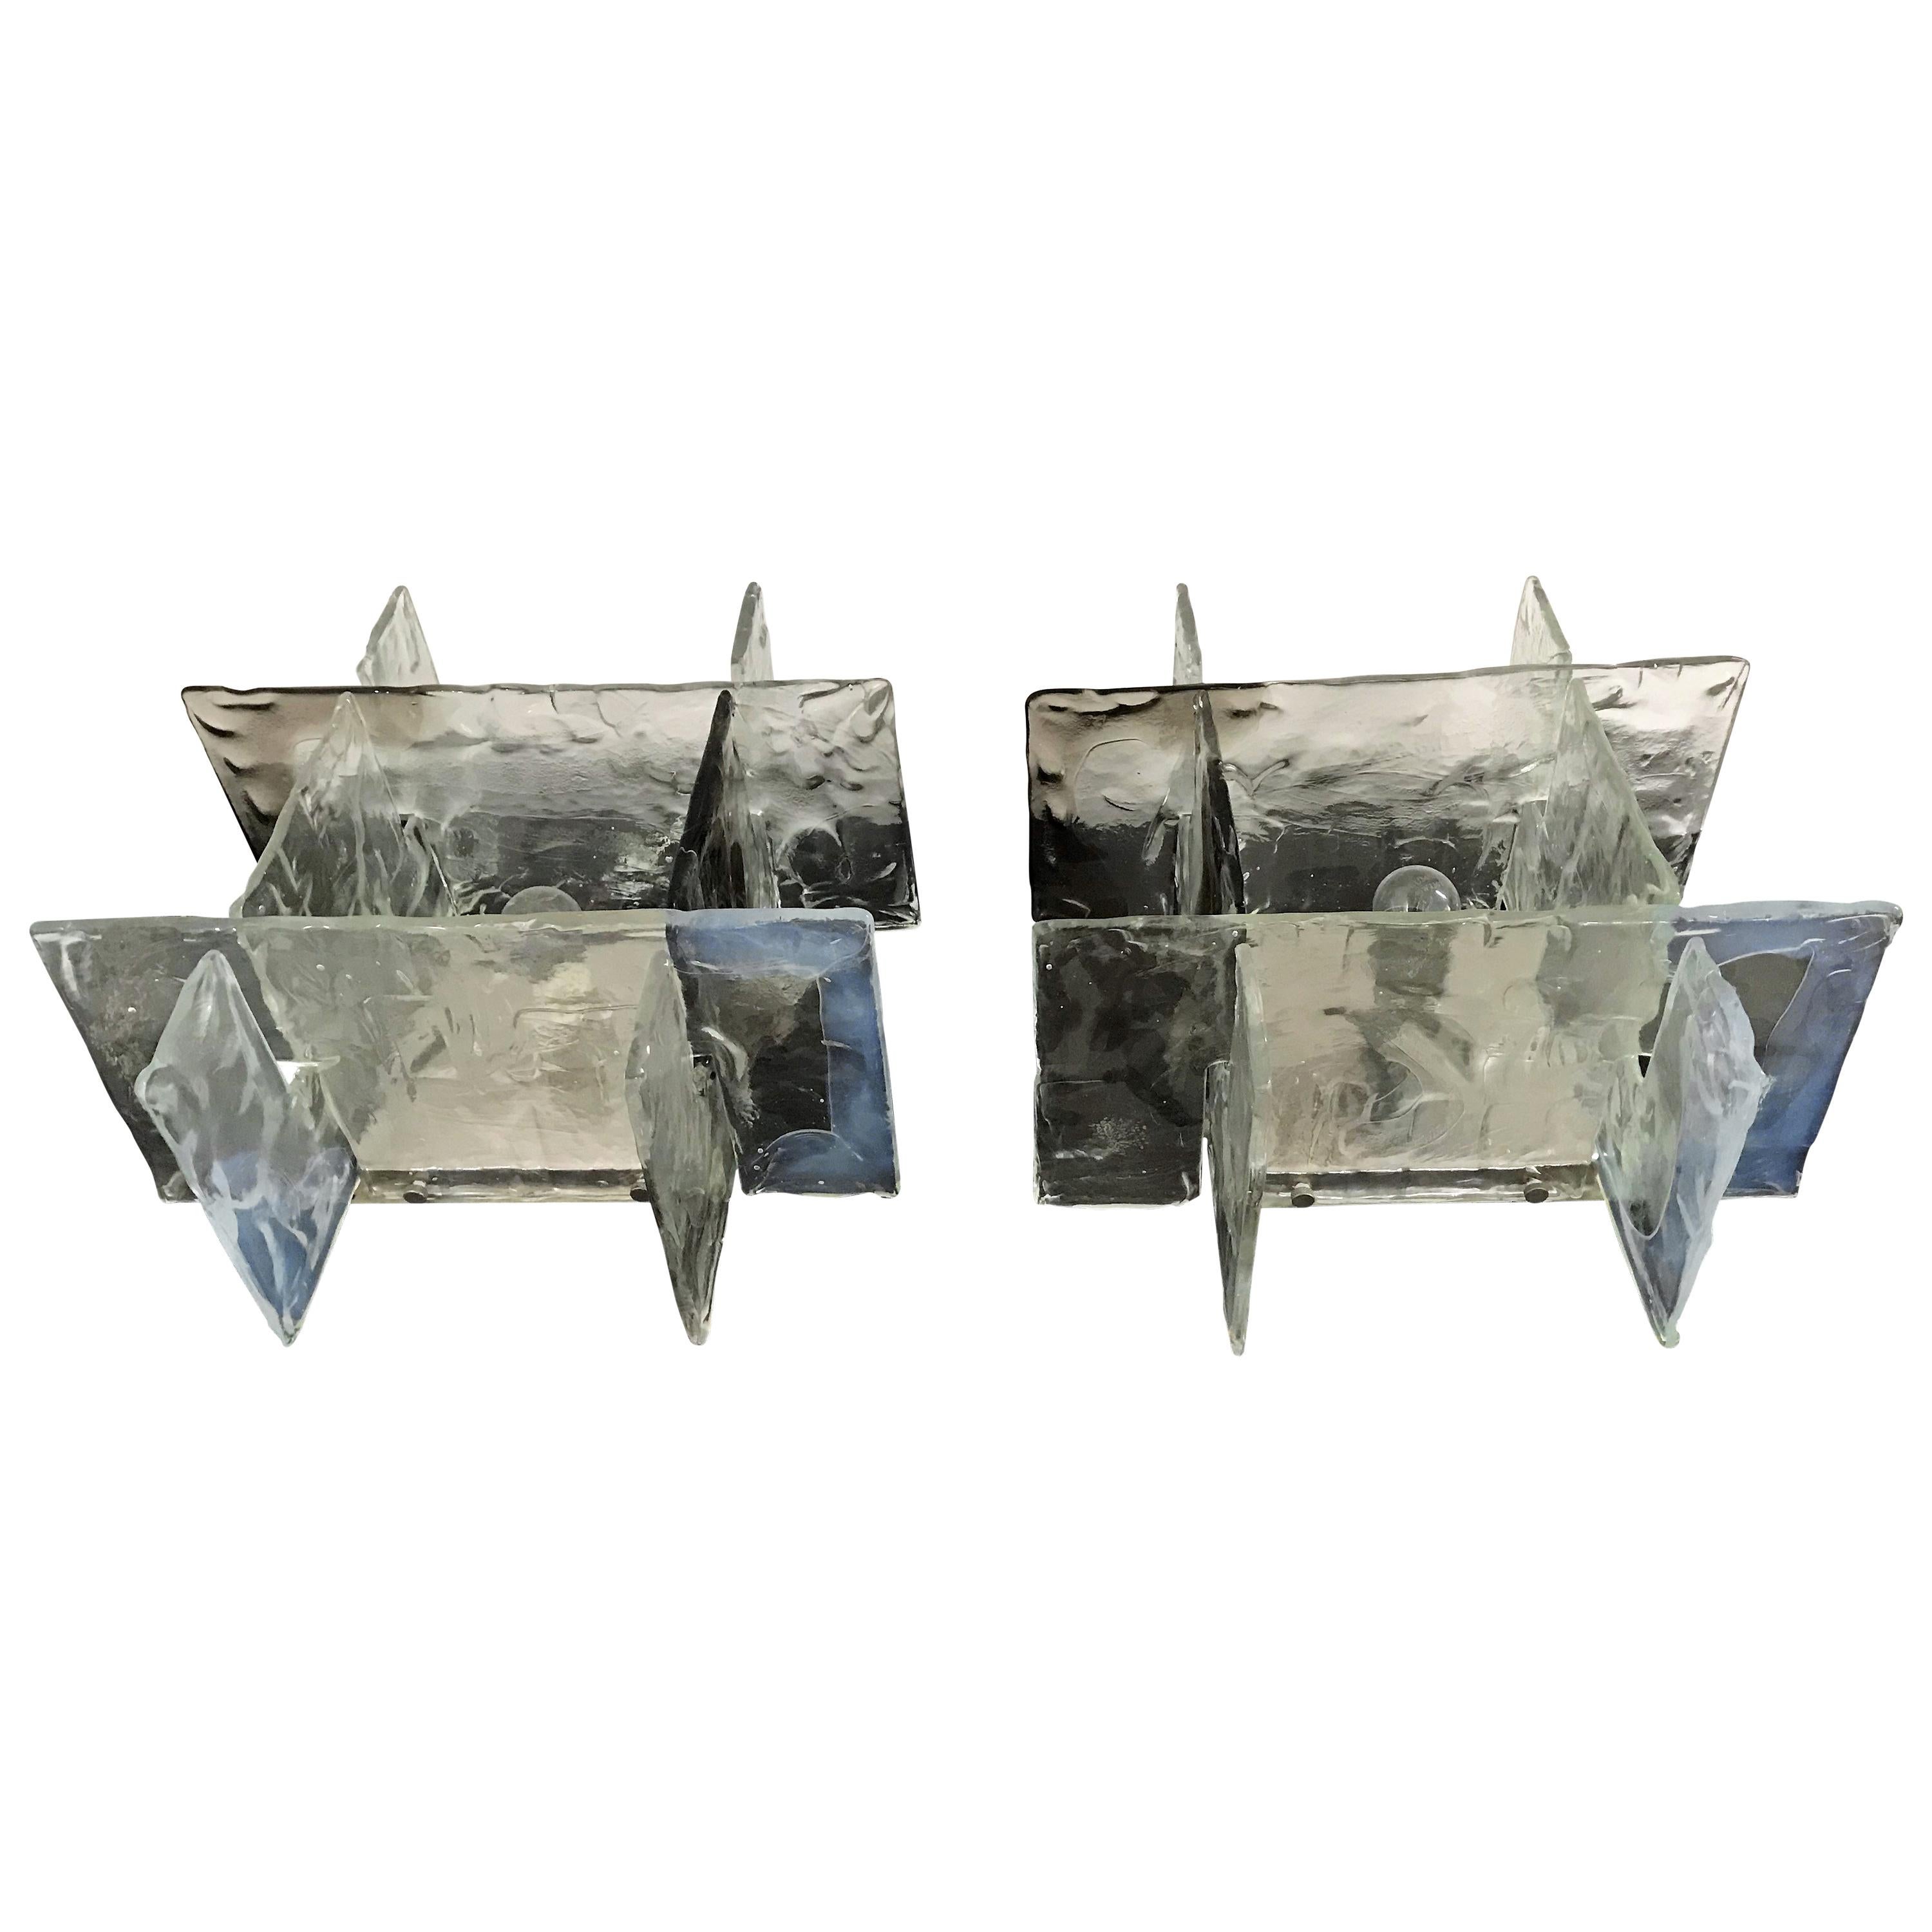 Pair of Mid-Century Modern Sconces by Carlo Nason for Mazzega in Murano Glass